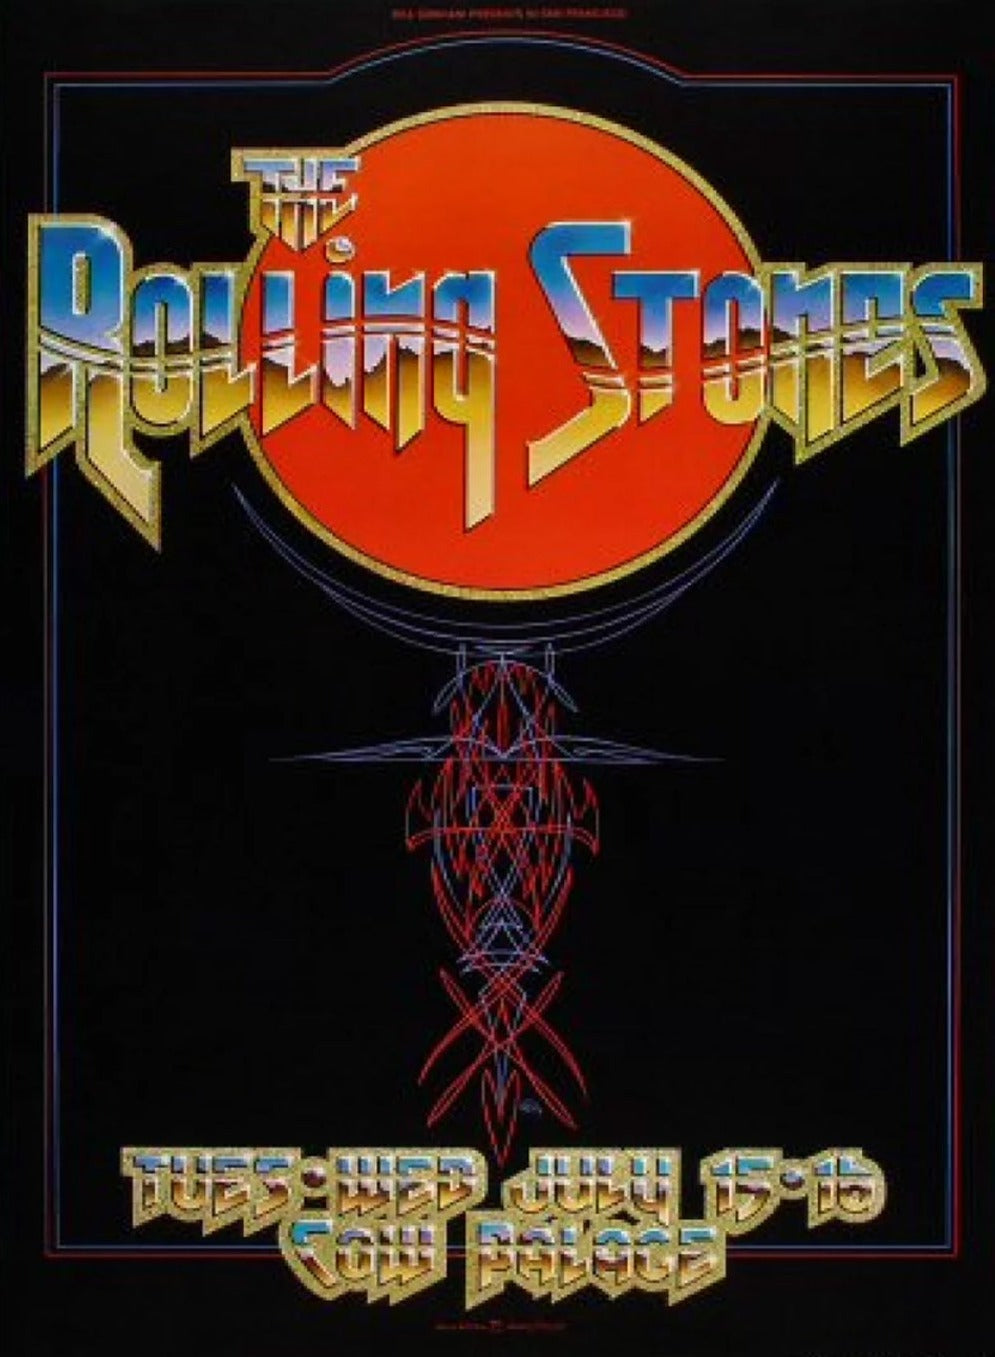 Rolling Stones - Live at Cow Palace